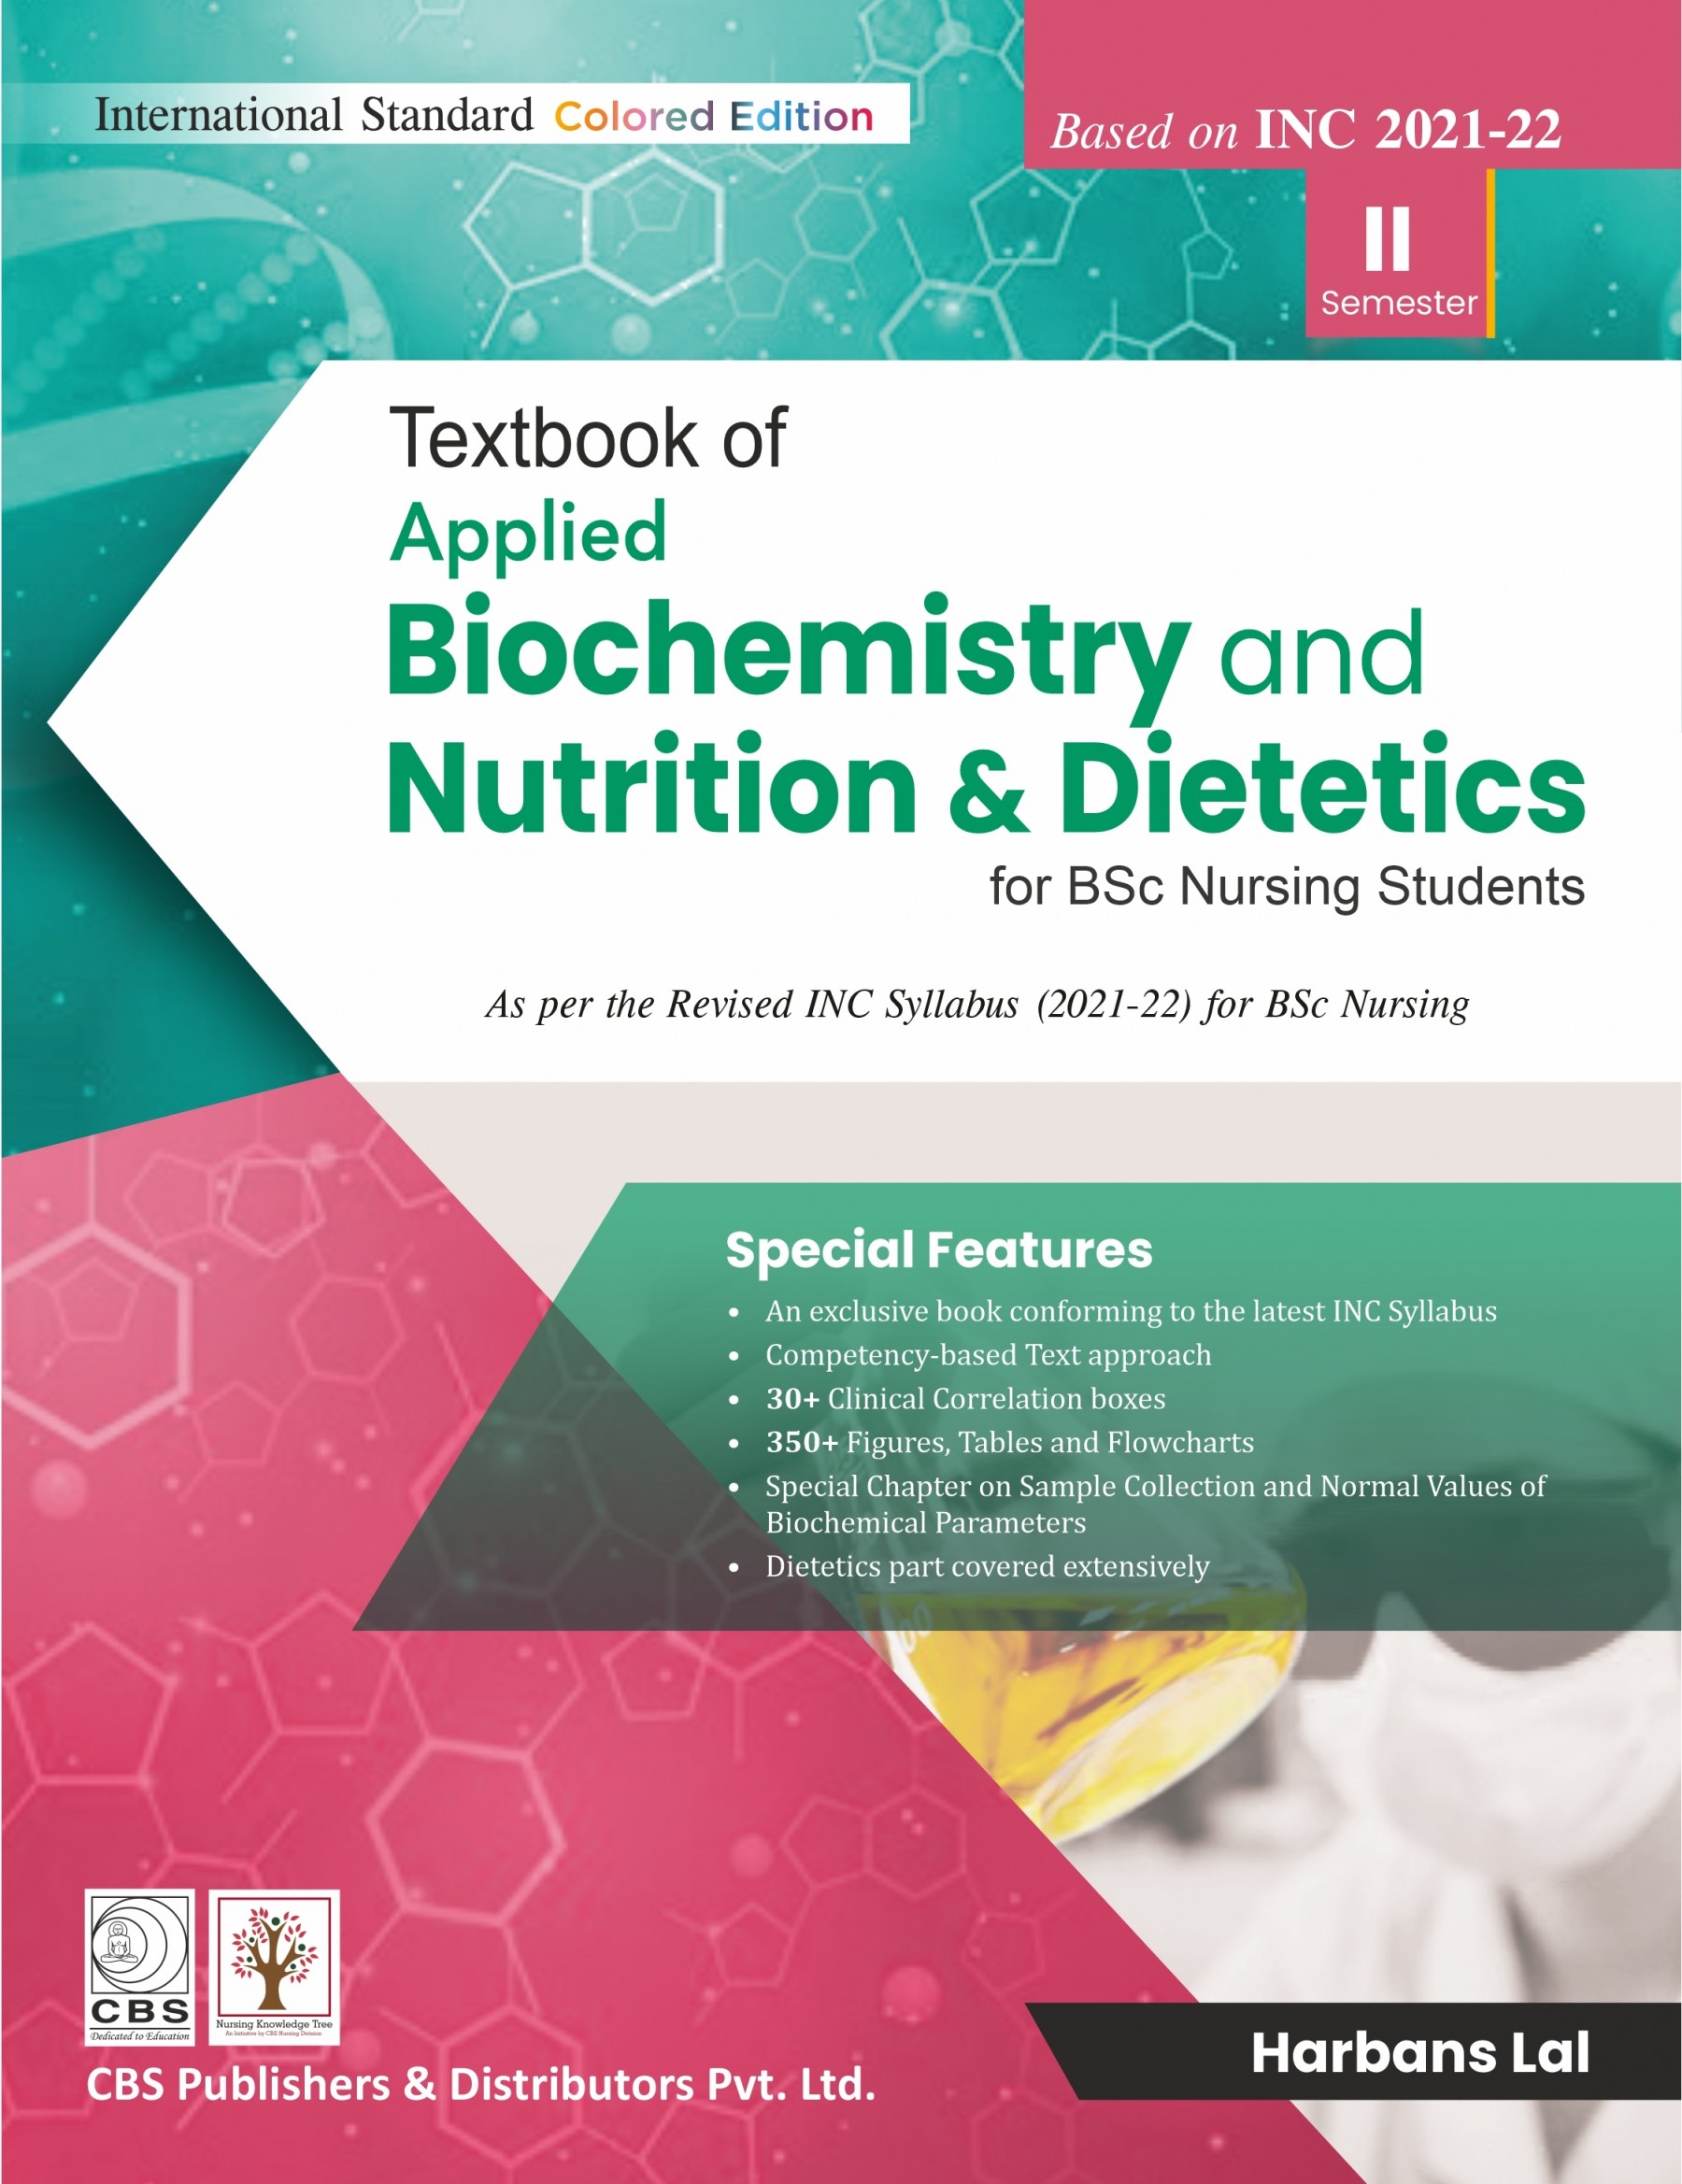 Textbook of Applied Biochemistry and Nutrition & Dietetics for BSc Nursing (Based on INC 2021-22) (9789390619412)